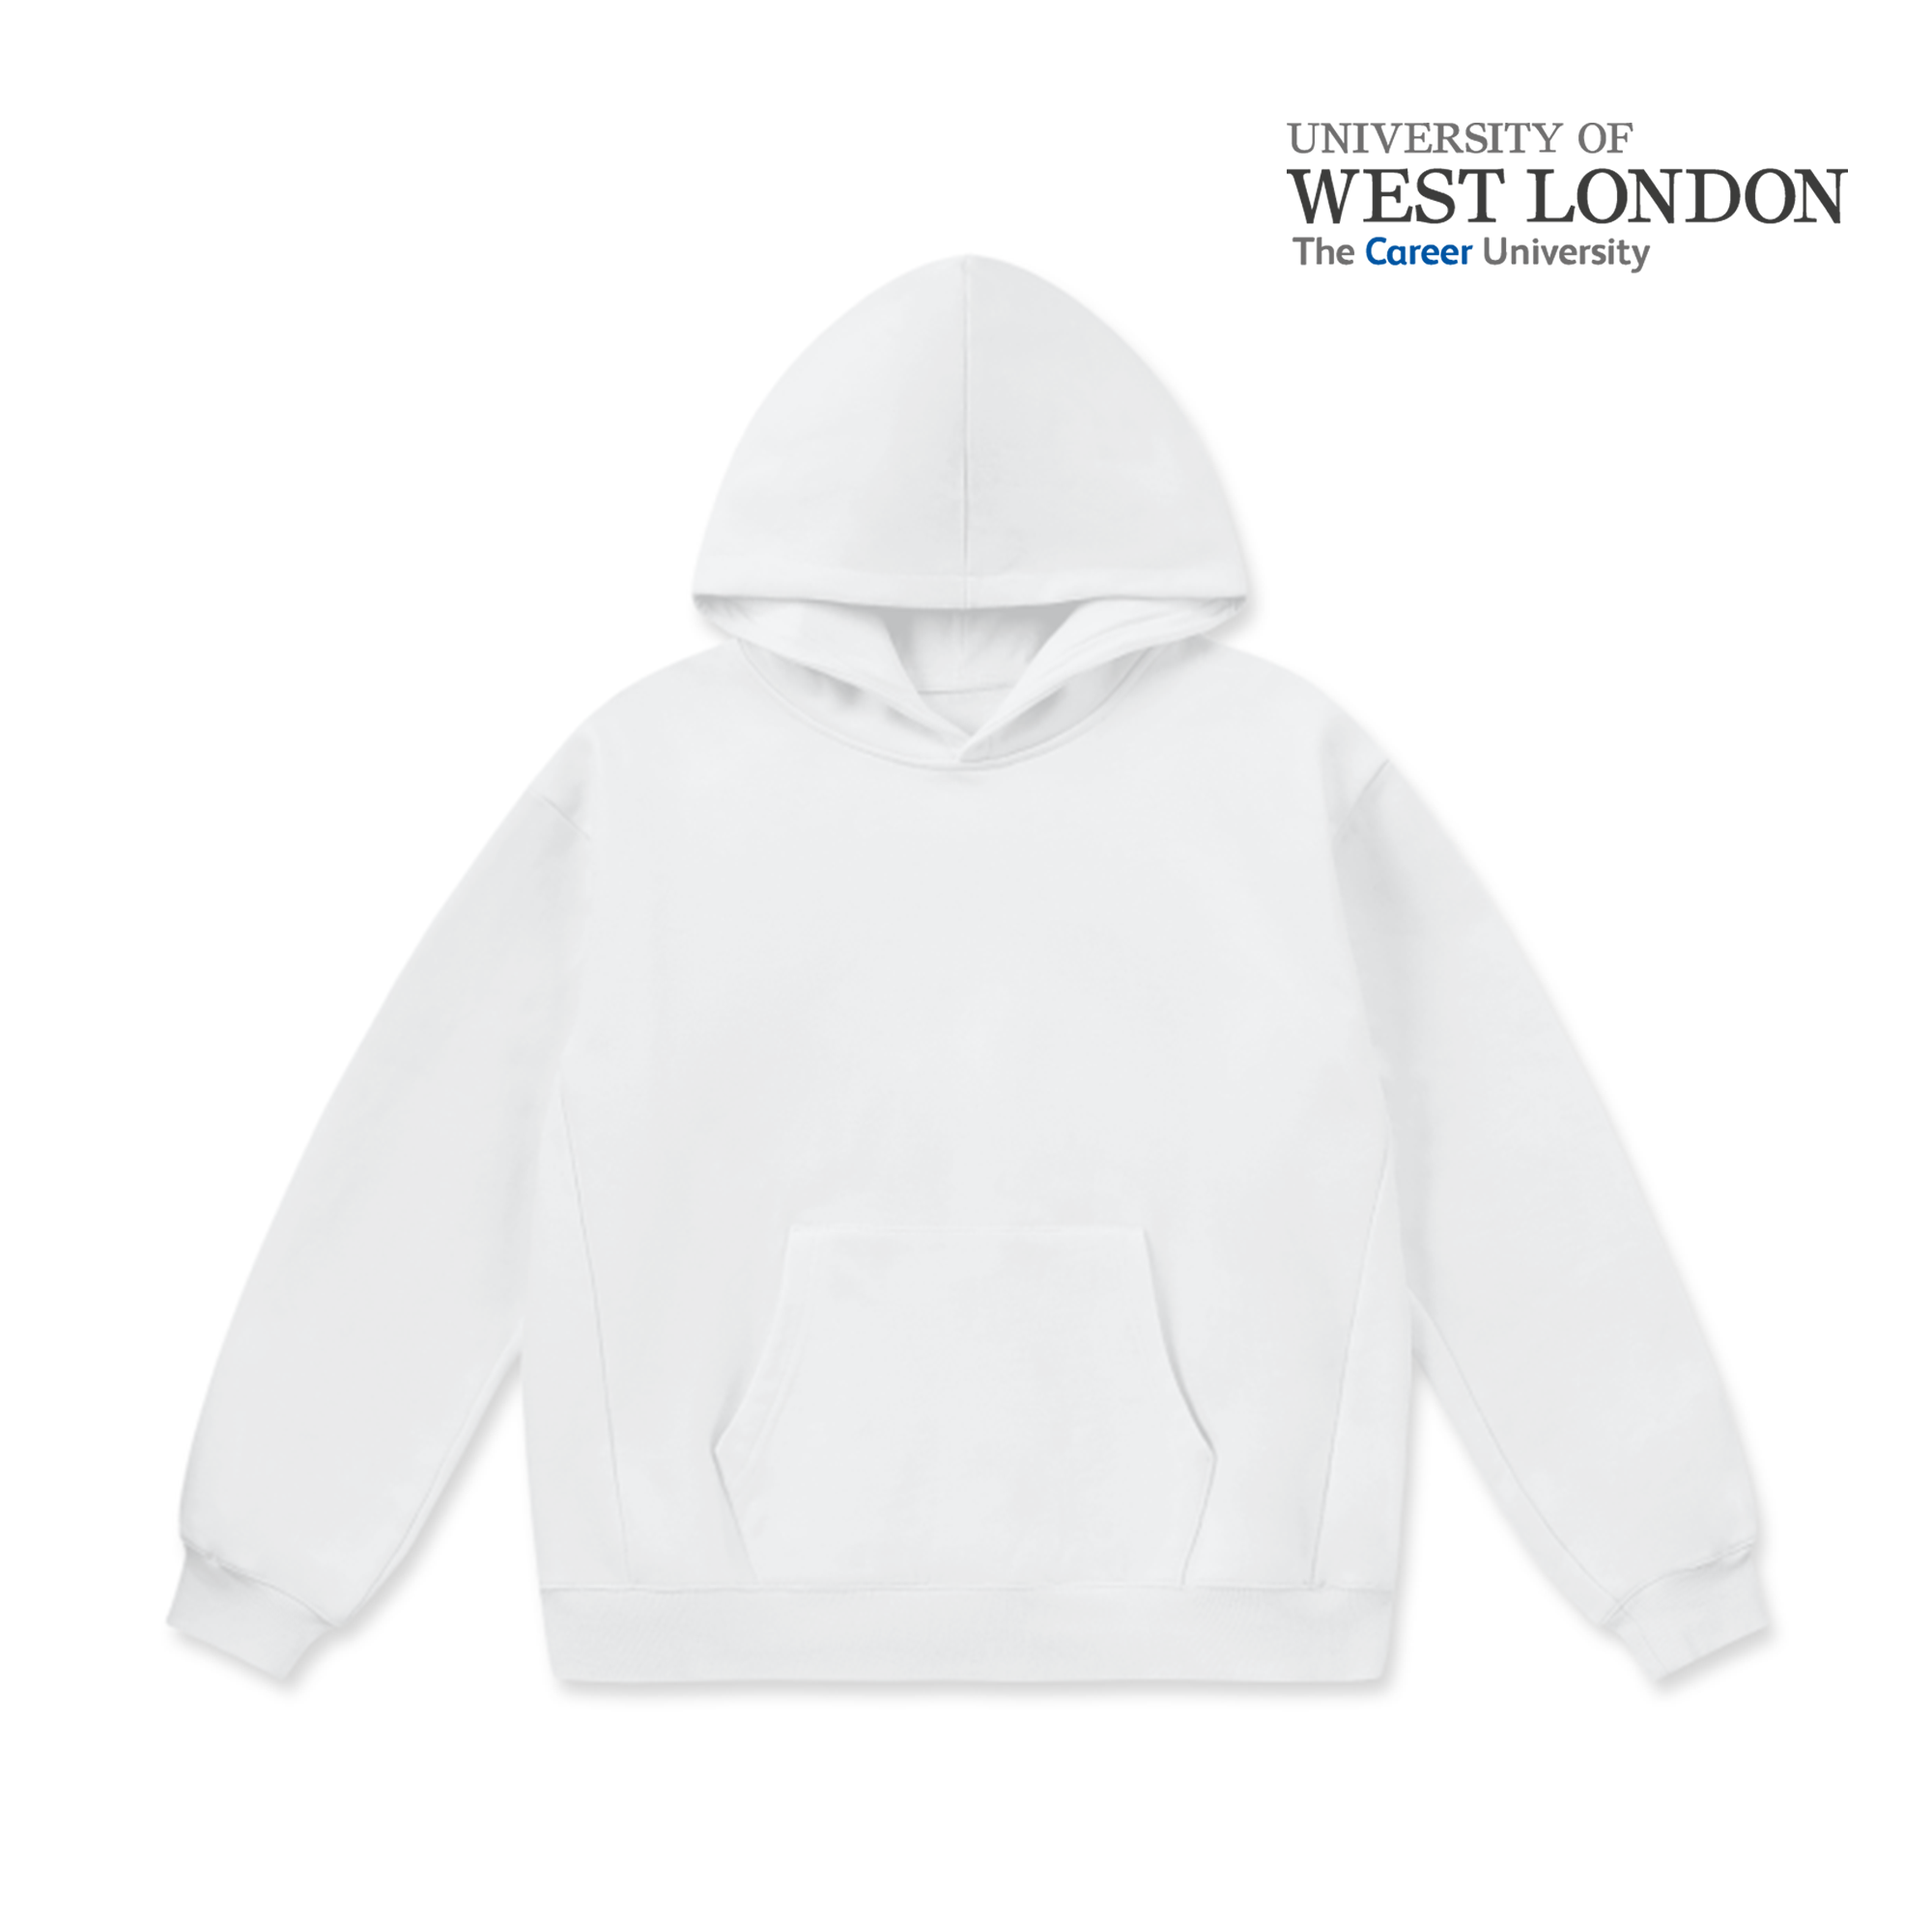 LCC Super Weighted Hoodie - University of West London (Modern)